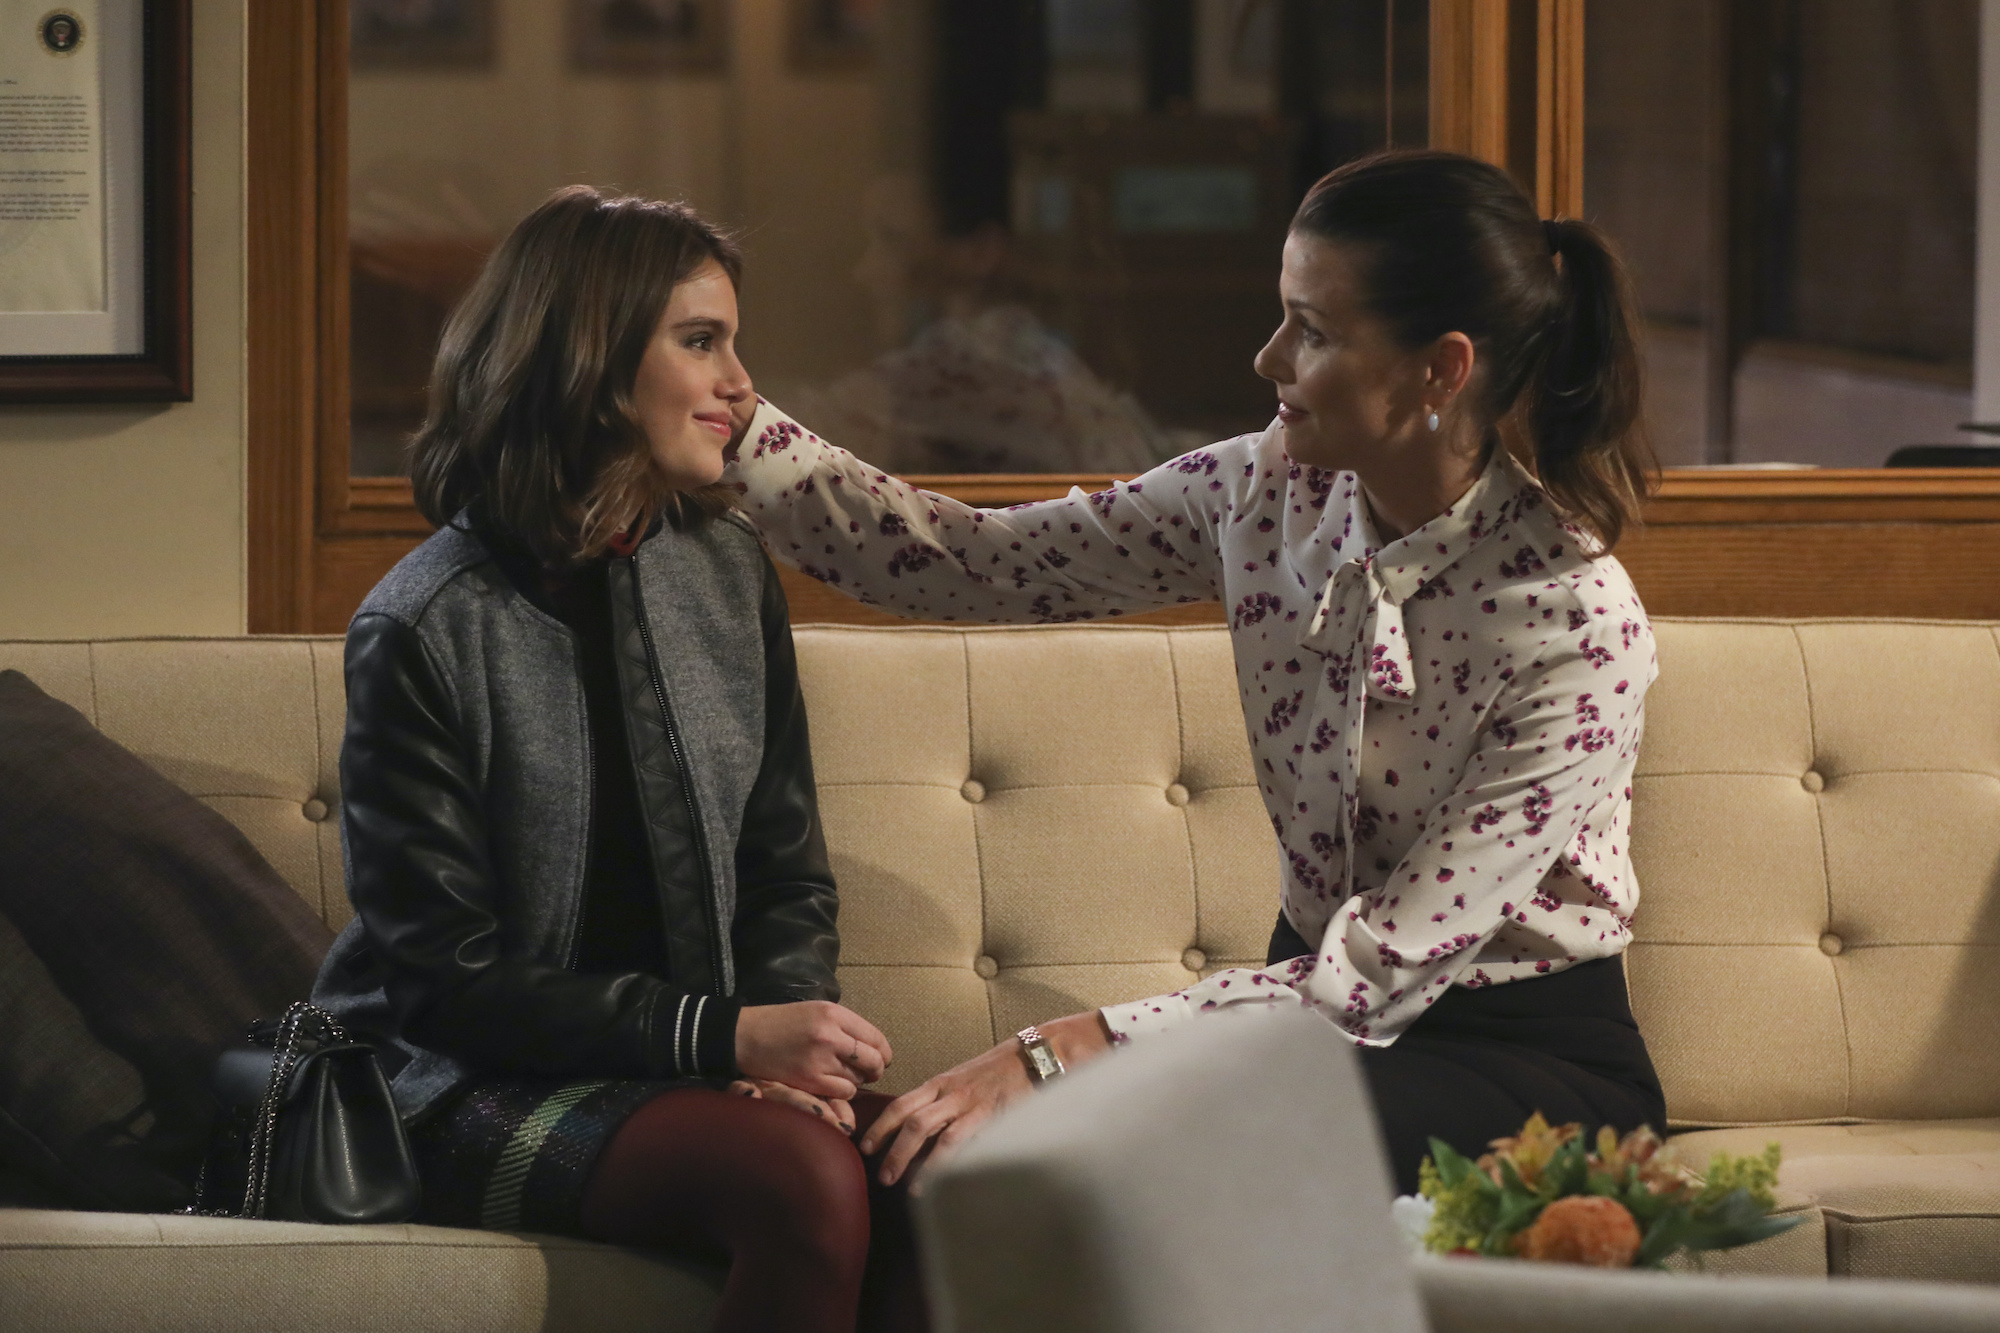 (L-R) Sami Gayle as Nicky Reagan and Bridget Moynahan as Erin Reagan sitting on a couch, facing each other